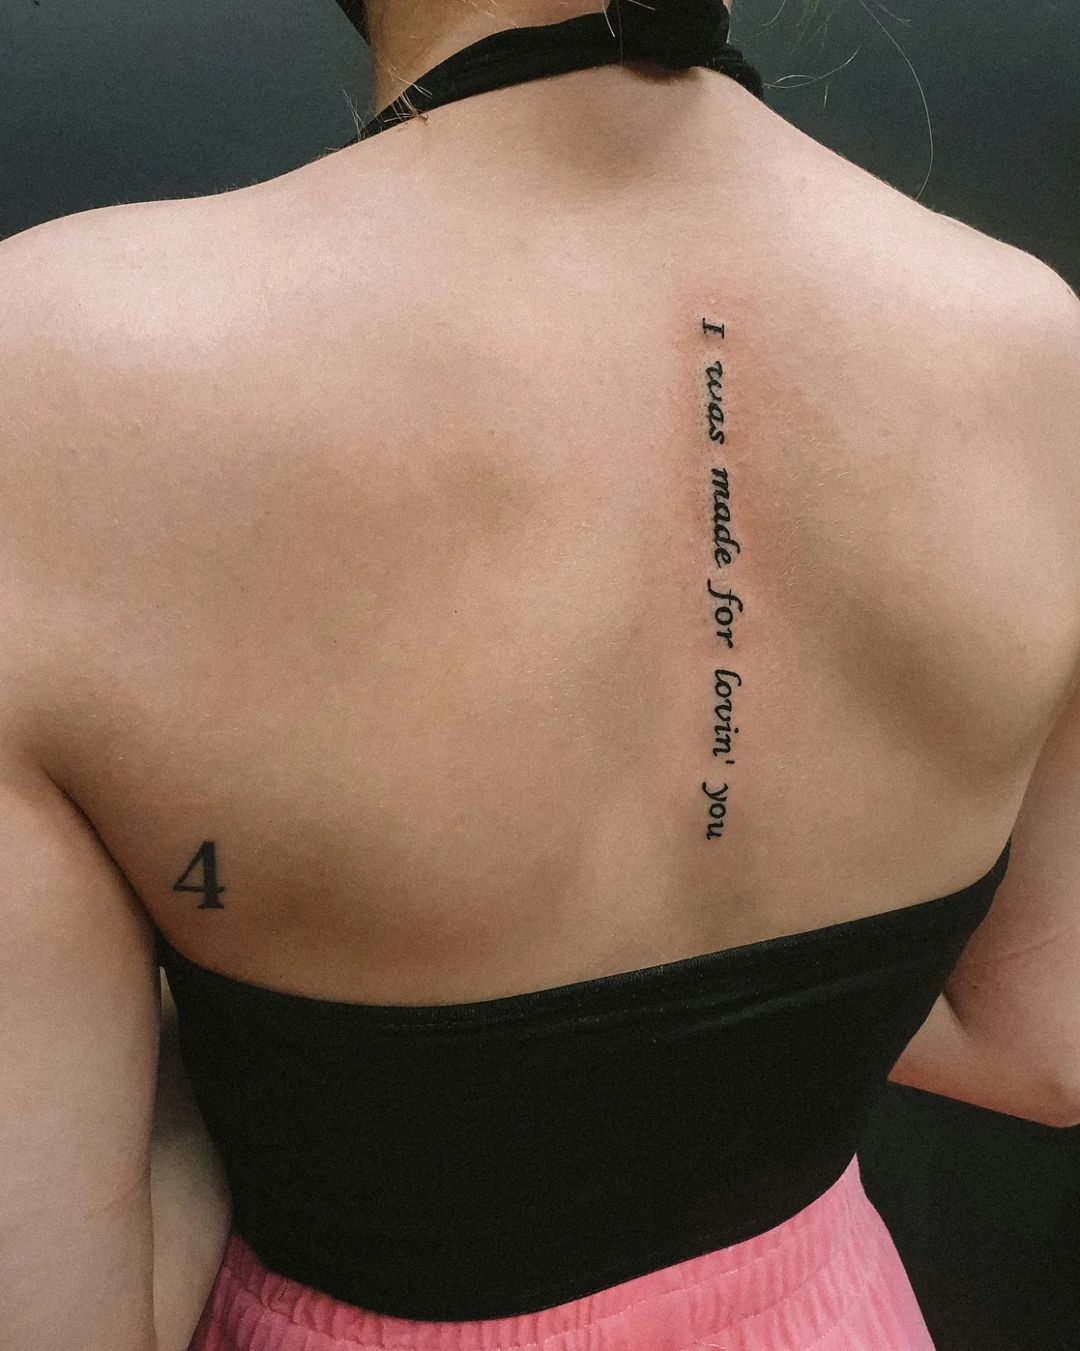 40 Inspiration for Quote Tattoos Whats Your Favorite  Saved Tattoo